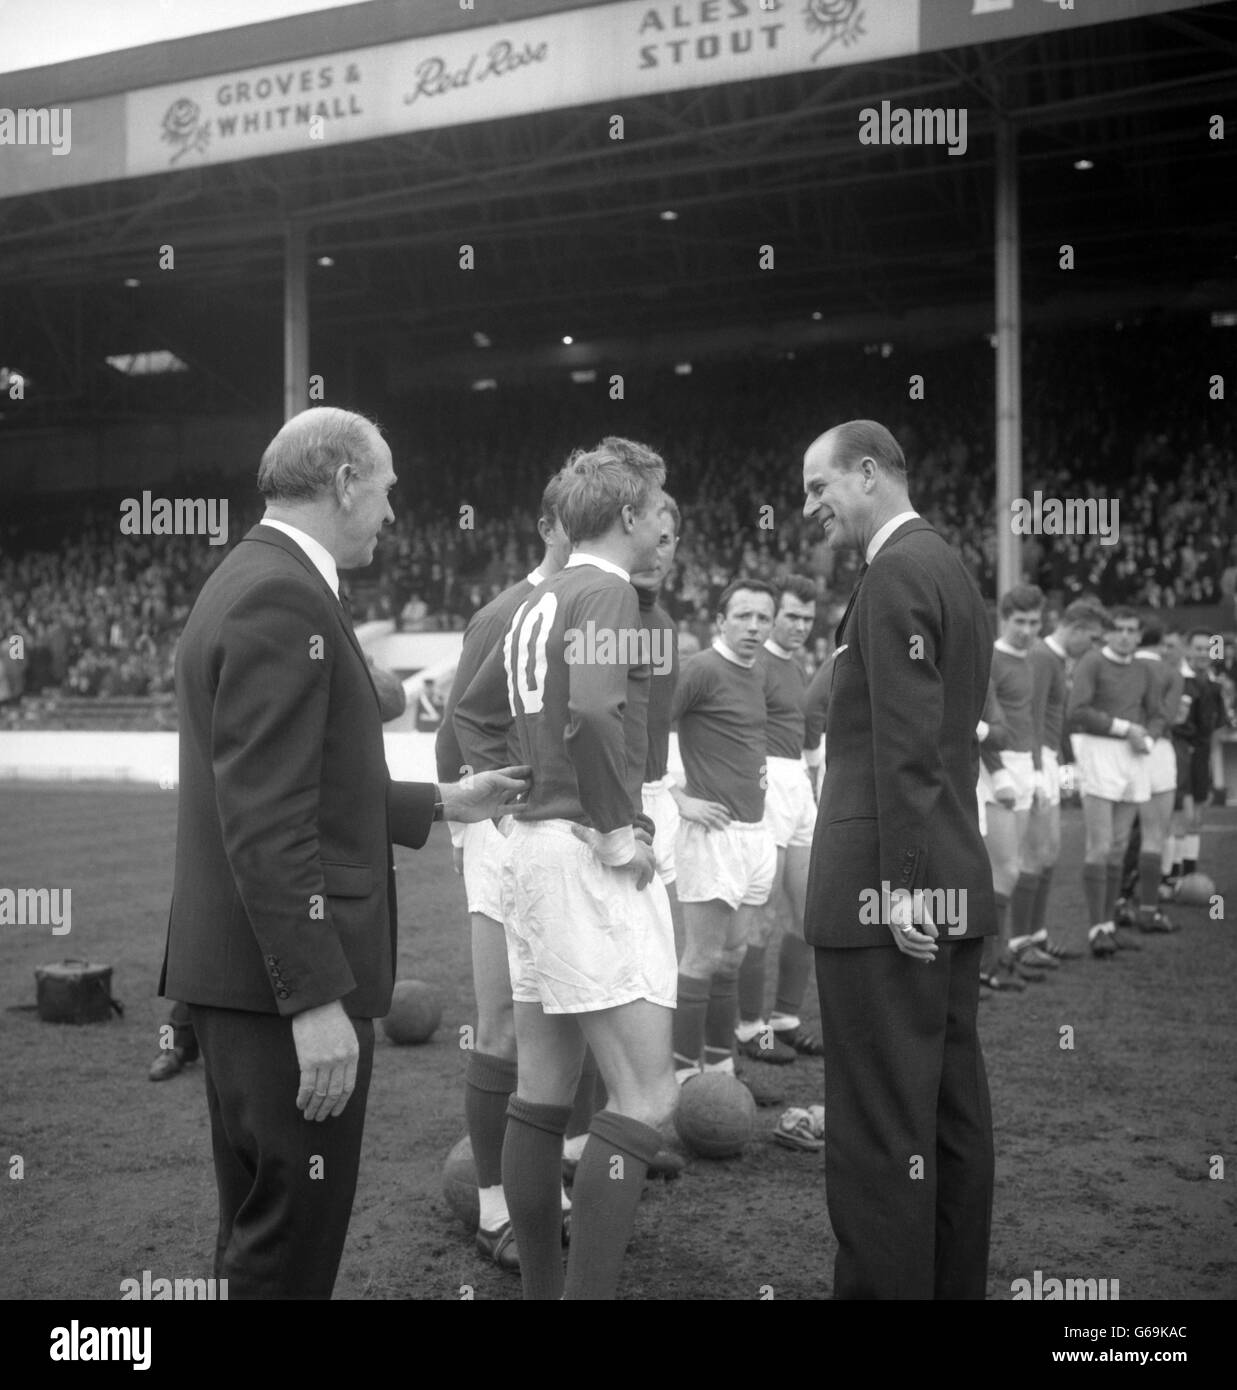 Manchester United's Denis Law gets a prod forward from manager Matt Busby as he is introduced to Prince Philip, The Duke of Edinburgh, during the team line-up before the match Stock Photo